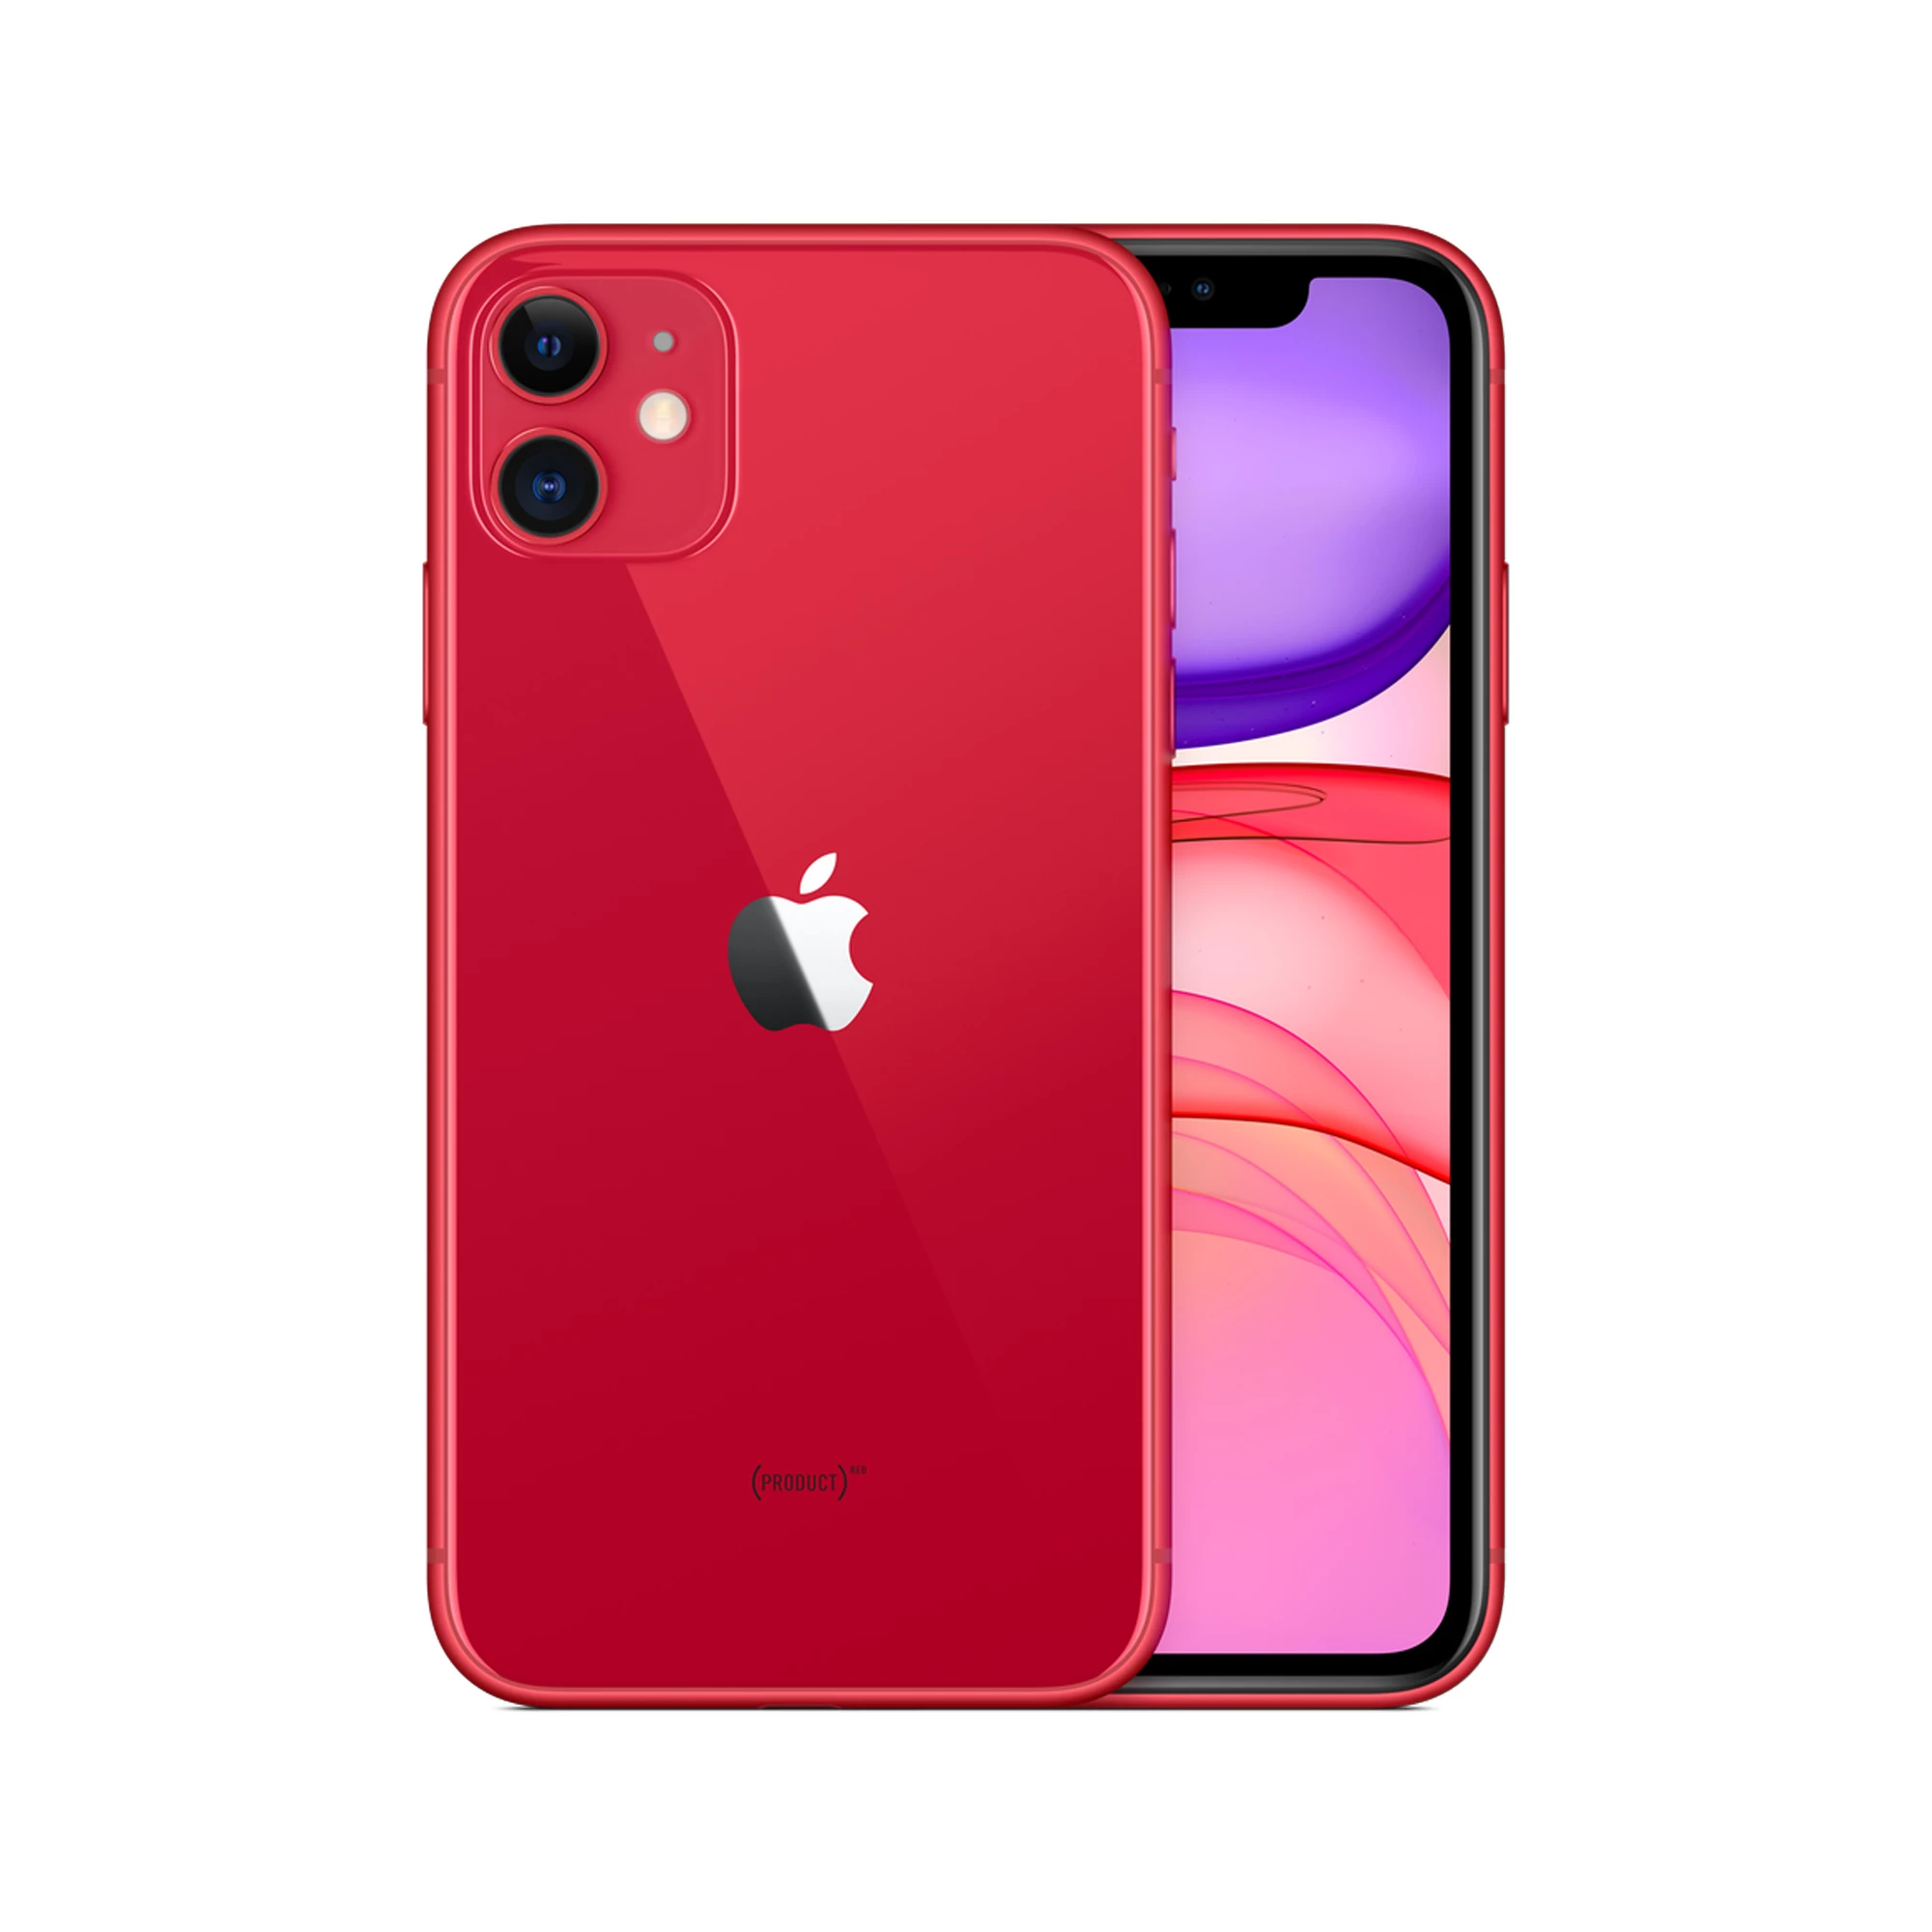 Apple iPhone 11 128GB Product (RED) (MWLG2) Full Box